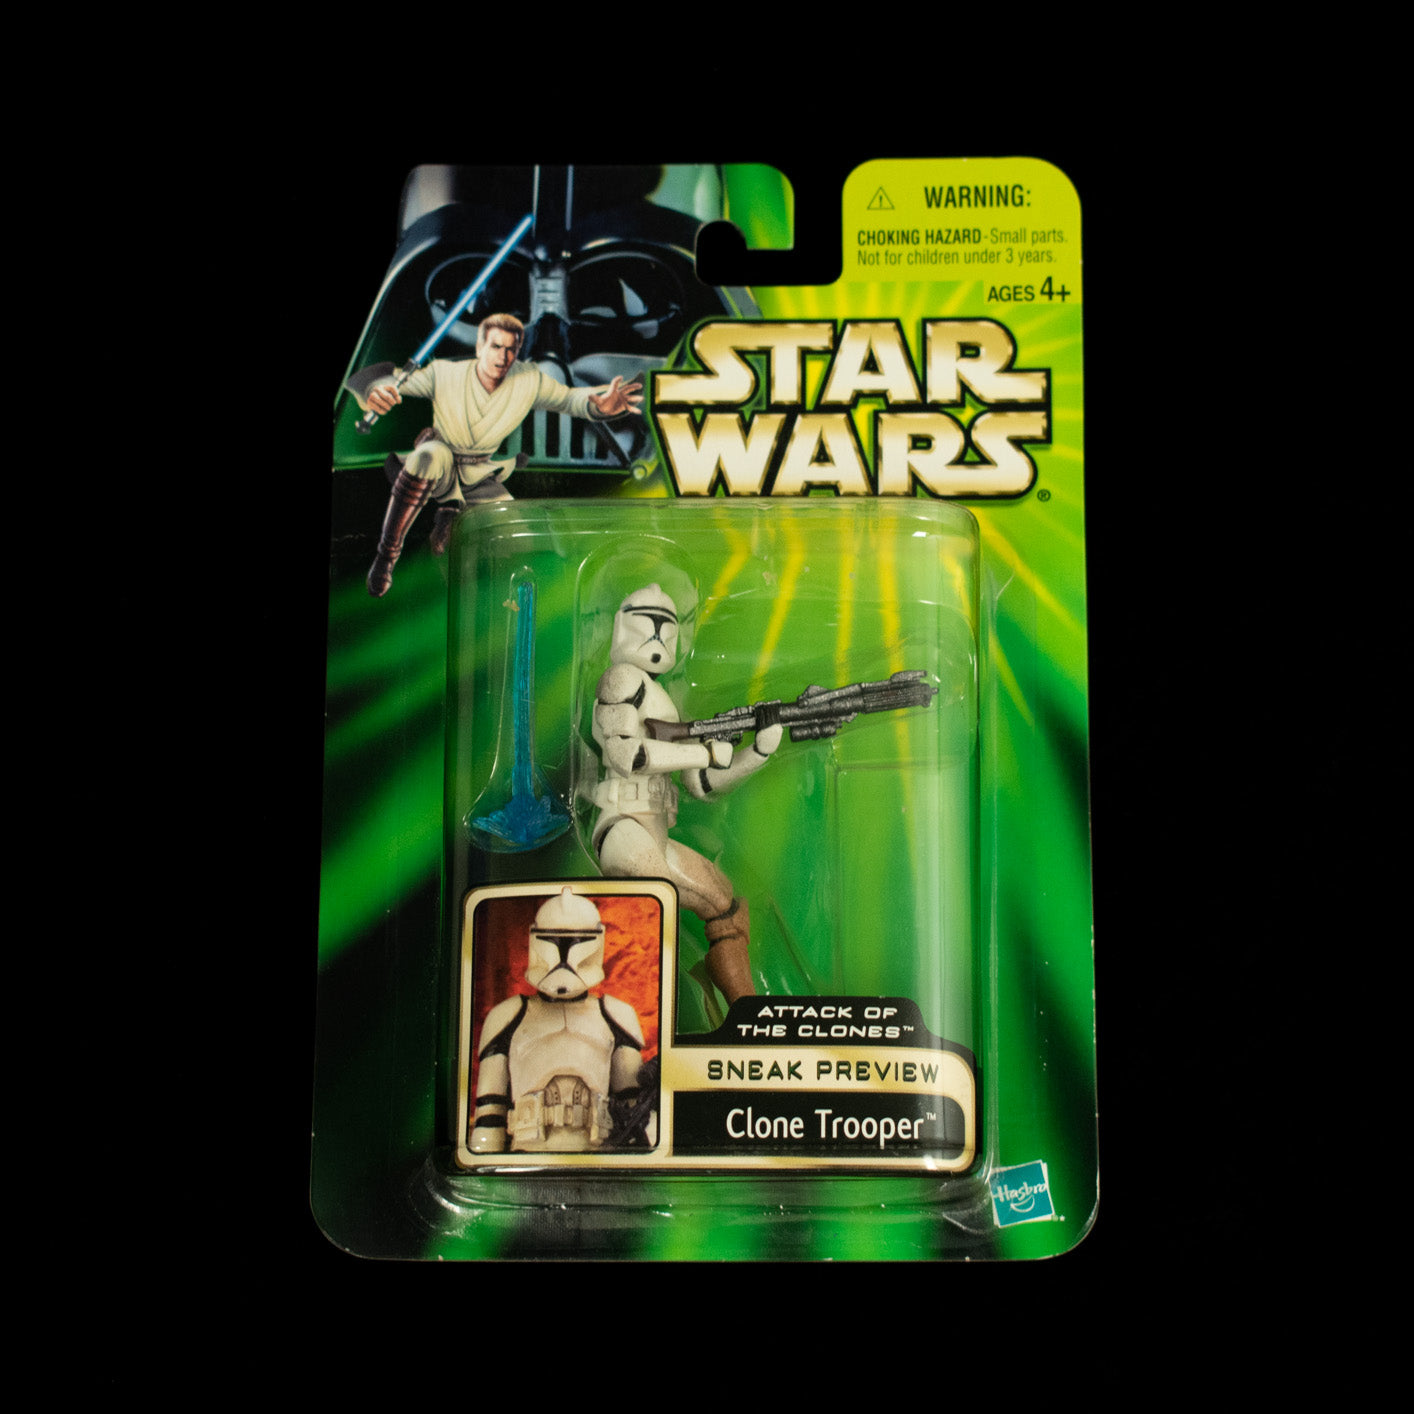 Star Wars Power of the Jedi Action Figure Attack of the Clones Clone Trooper Sneak Preview